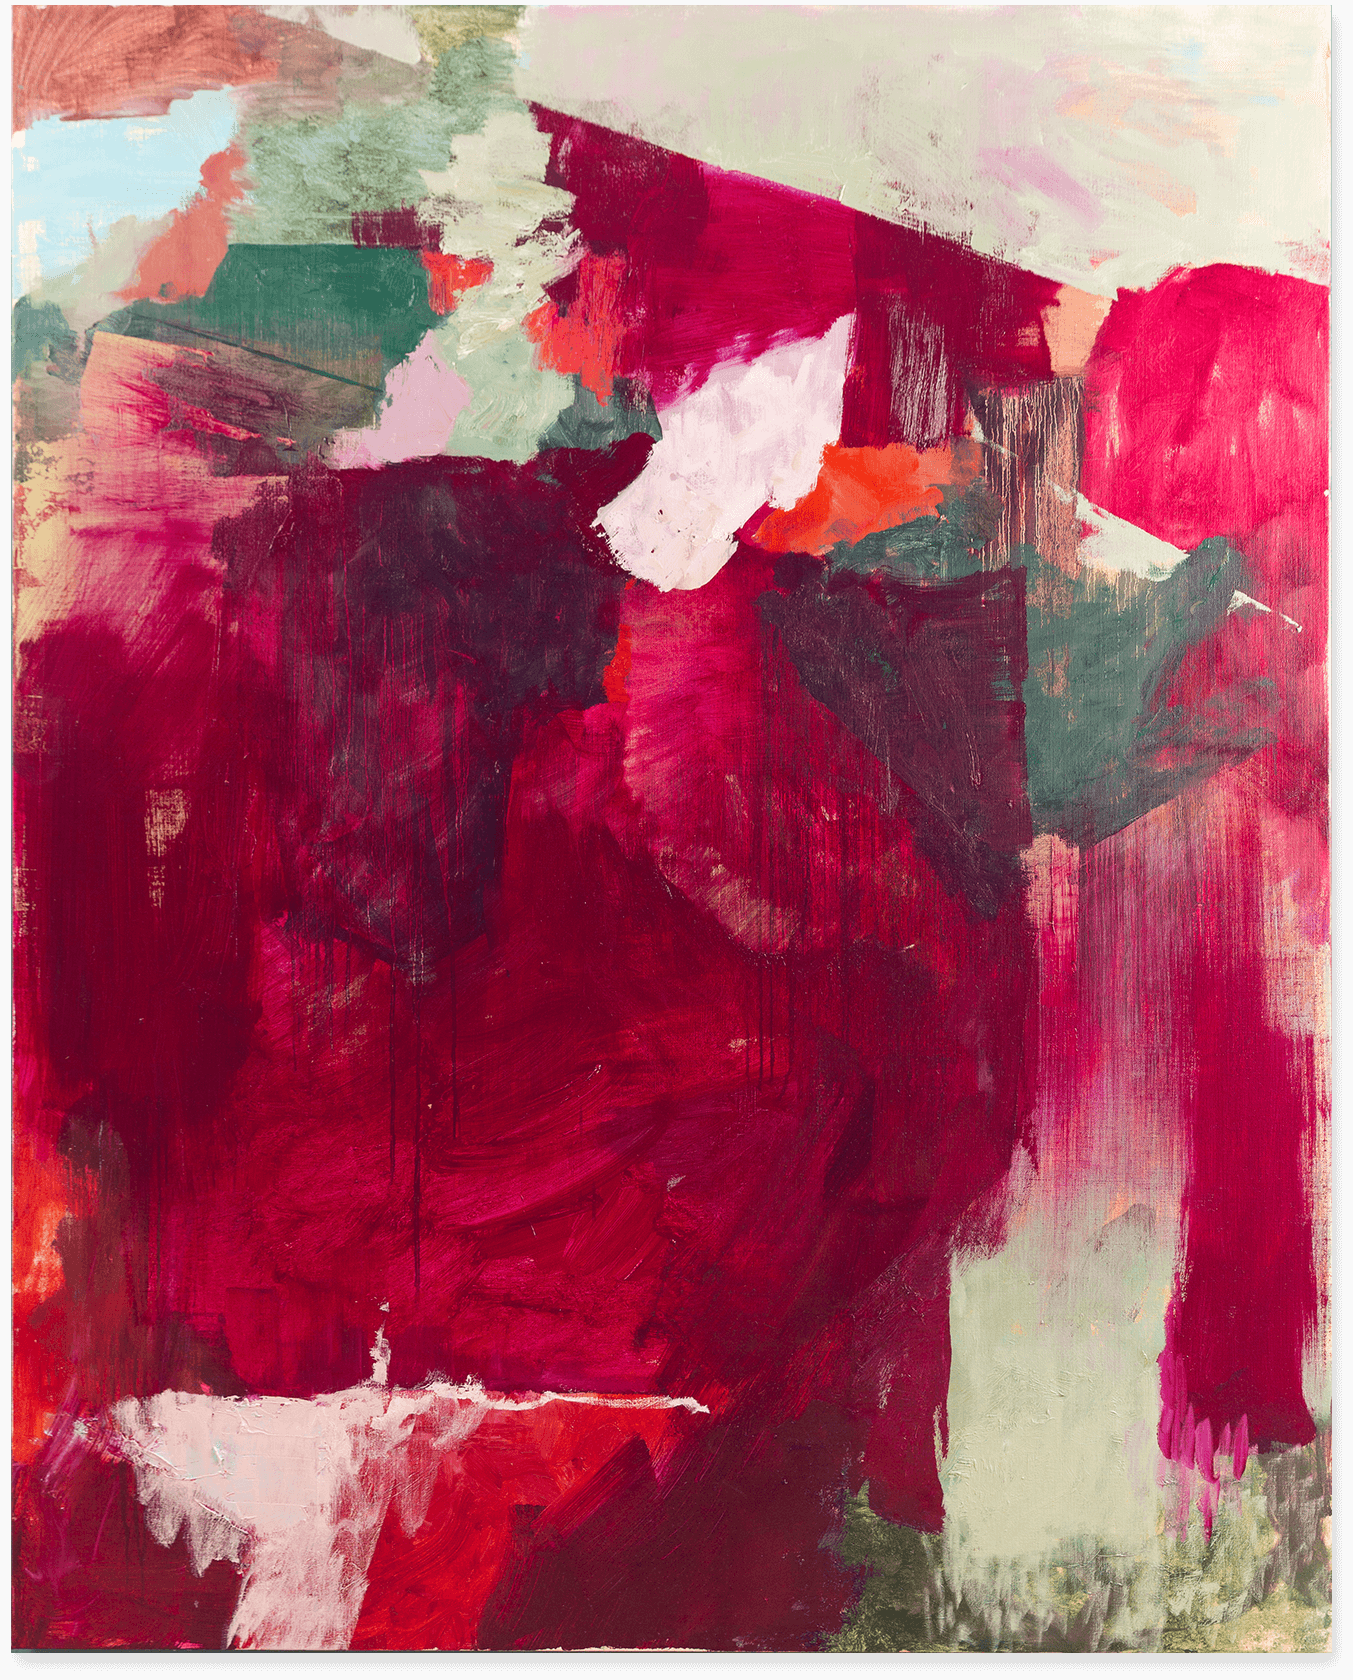 An abstract oil painting in greens, whites and transparent reds